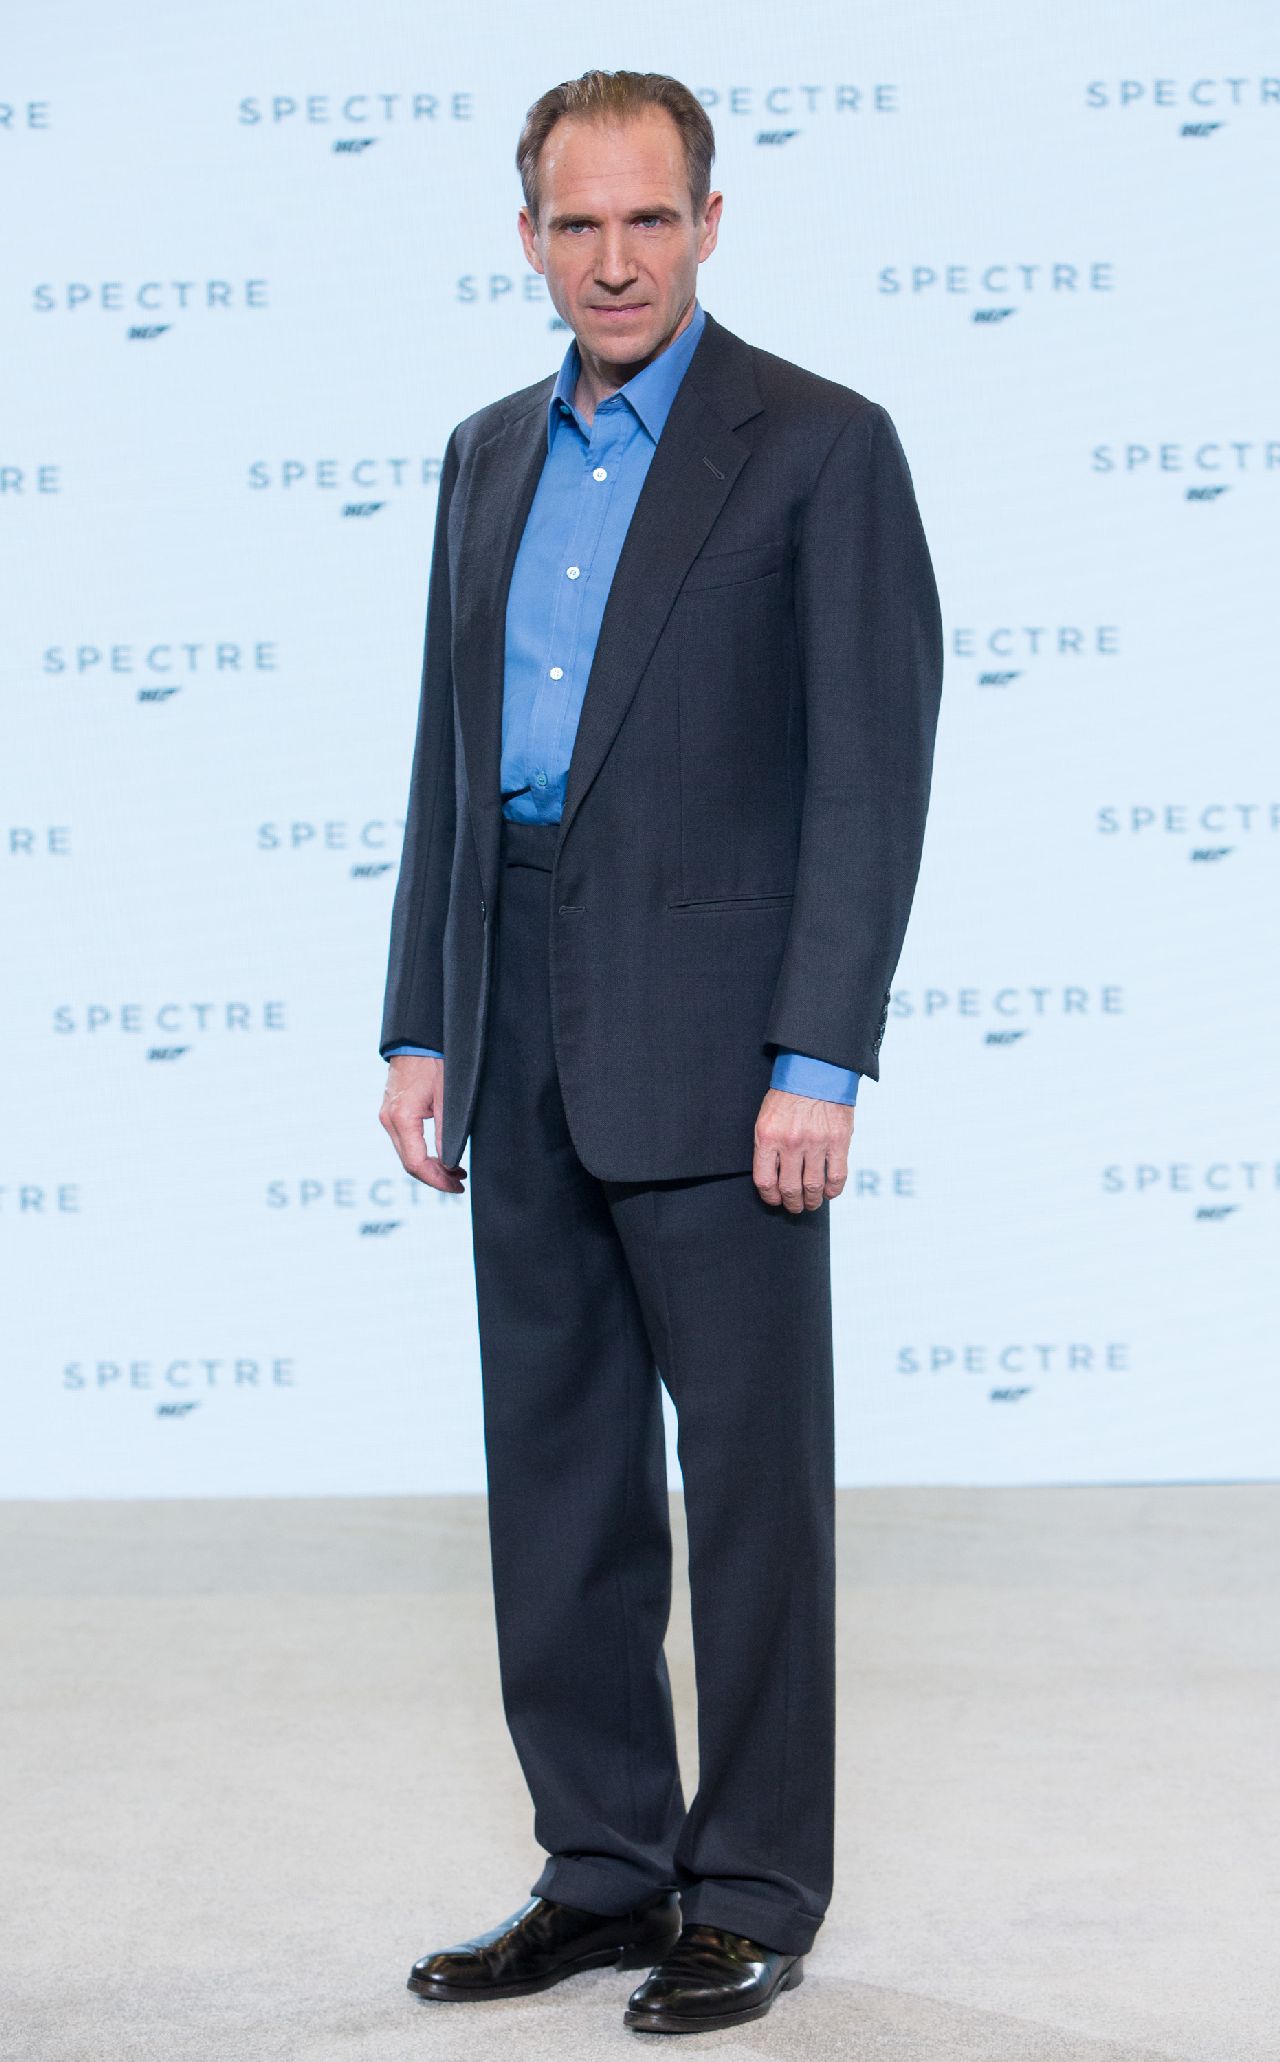 Eon Productions, Metro-Goldwyn-Mayer and Sony Pictures Entertainment announce the 24th James Bond adventure " SPECTRE. " Pictured: Ralph Fiennes.